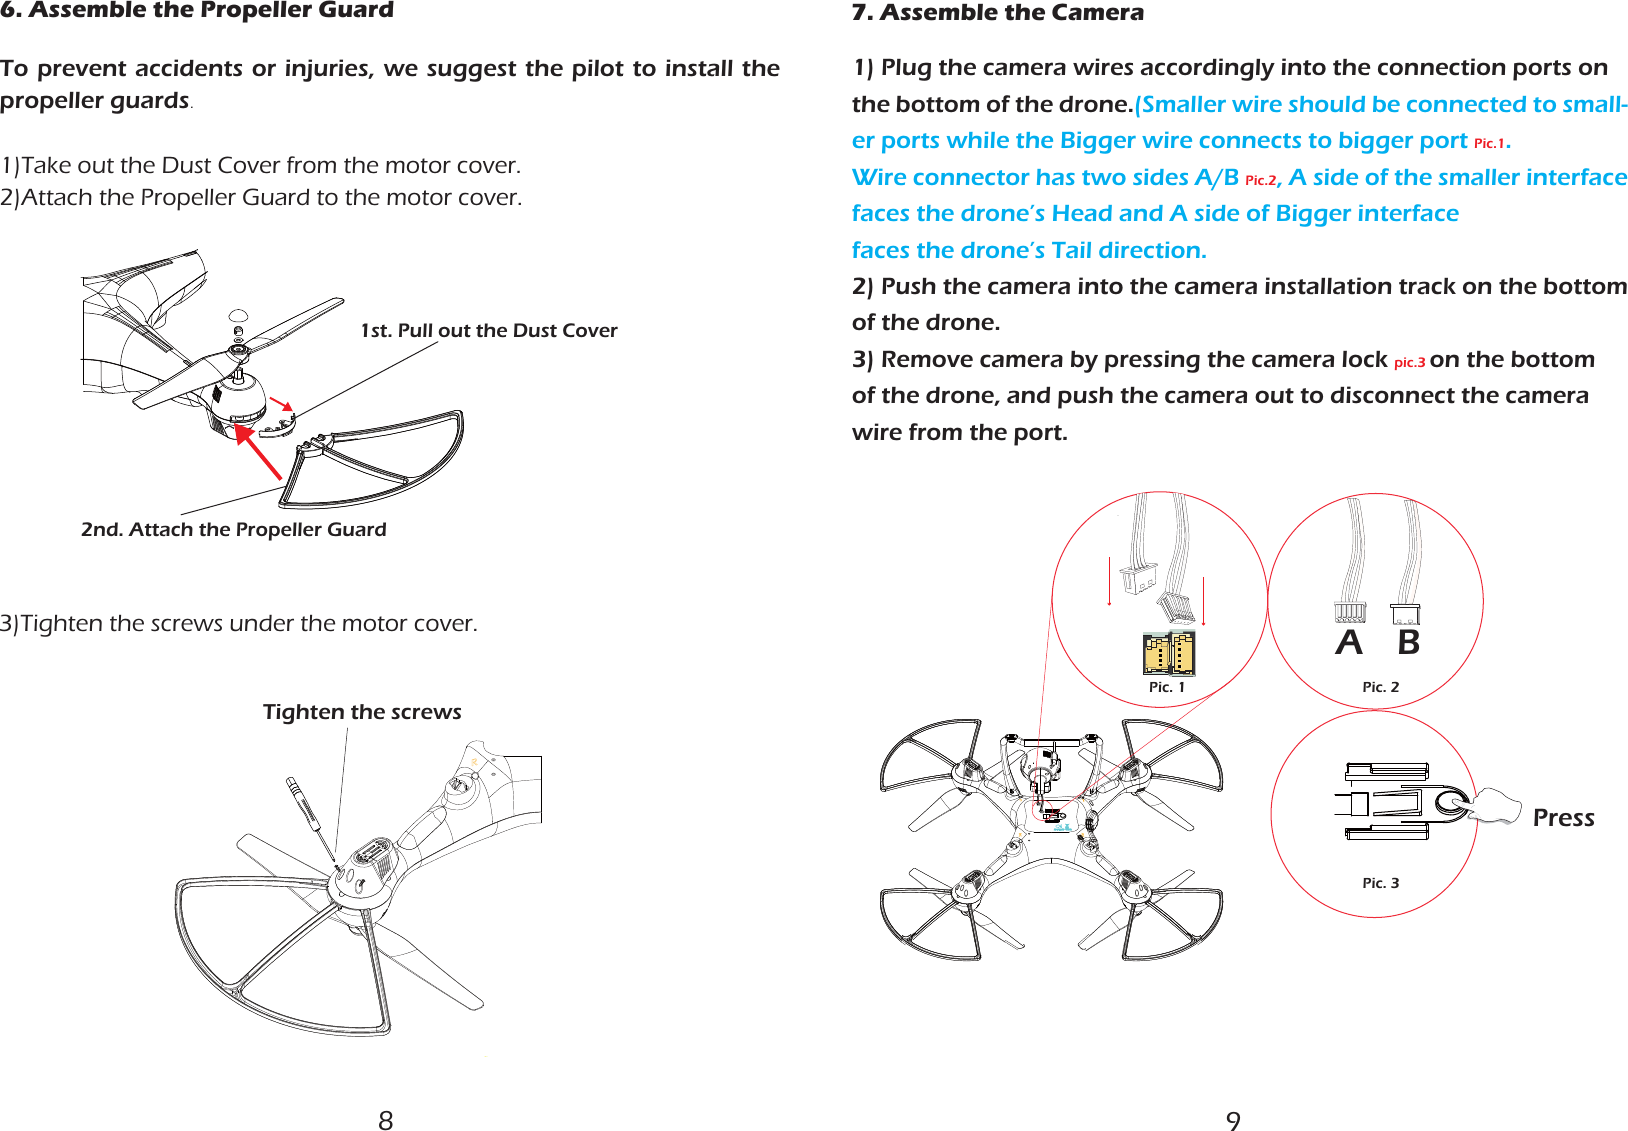  6. Assemble the Propeller Guard  1st. Pull out the Dust Cover2nd. Attach the Propeller GuardTighten the screws3)Tighten the screws under the motor cover.To prevent accidents or injuries, we suggest the pilot to install the propeller guards.1)Take out the Dust Cover from the motor cover.2)Attach the Propeller Guard to the motor cover.7. Assemble the CameraAPic. 2Pic. 3BPic. 1Press1) Plug the camera wires accordingly into the connection ports on the bottom of the drone.(Smaller wire should be connected to small-er ports while the Bigger wire connects to bigger port Pic.1. Wire connector has two sides A/B Pic.2, A side of the smaller interface faces the drone’s Head and A side of Bigger interfacefaces the drone’s Tail direction.2) Push the camera into the camera installation track on the bottom of the drone.3) Remove camera by pressing the camera lock pic.3 on the bottom of the drone, and push the camera out to disconnect the camera wire from the port. 89